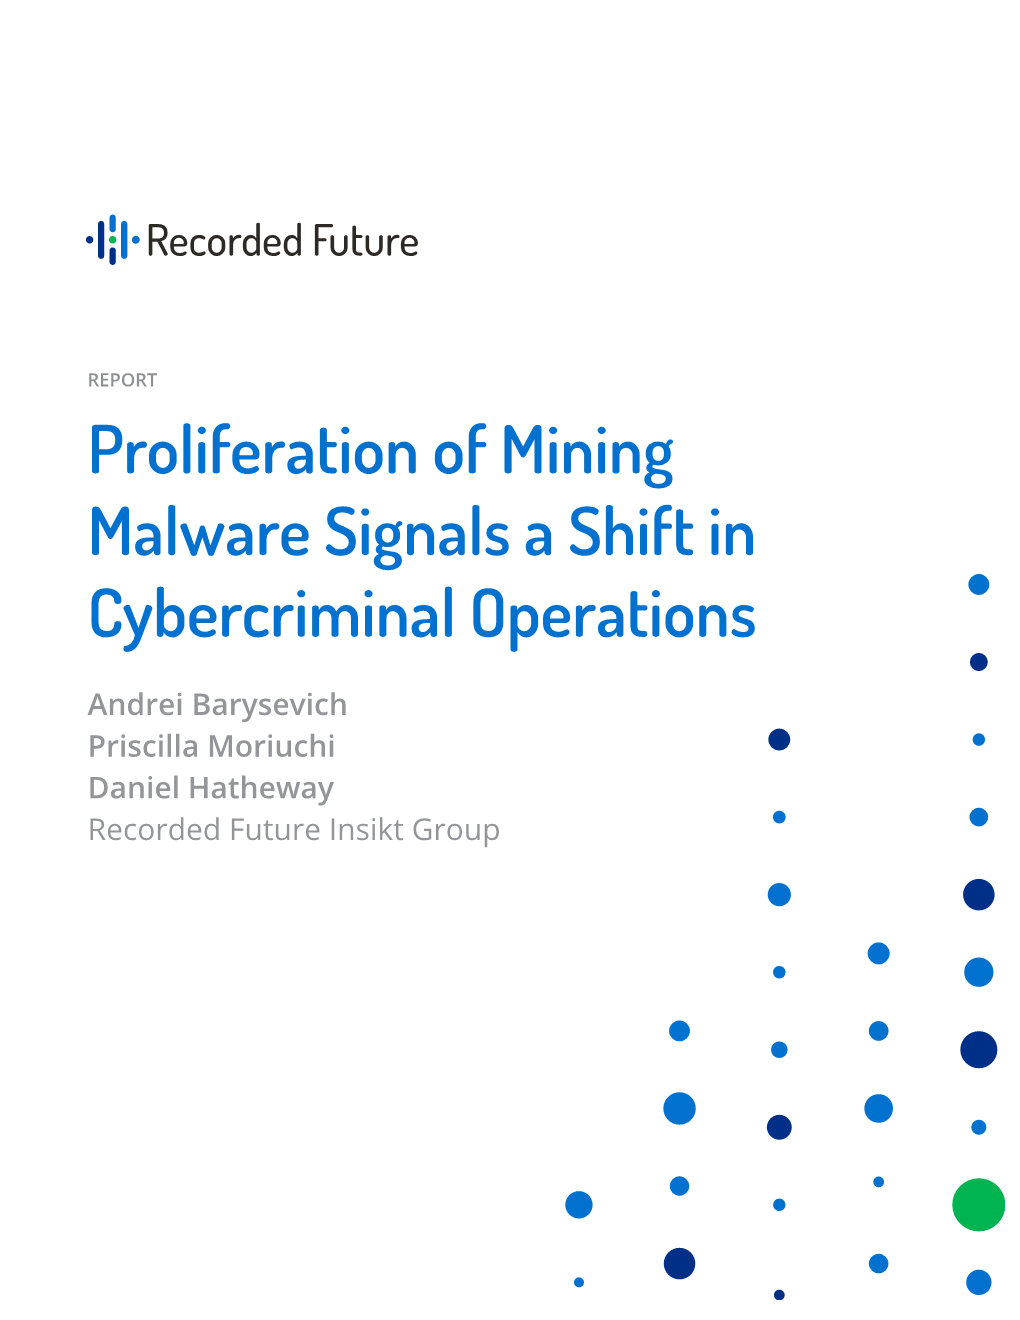 Proliferation of Mining Malware Signals a Shift in Cybercriminal Operations